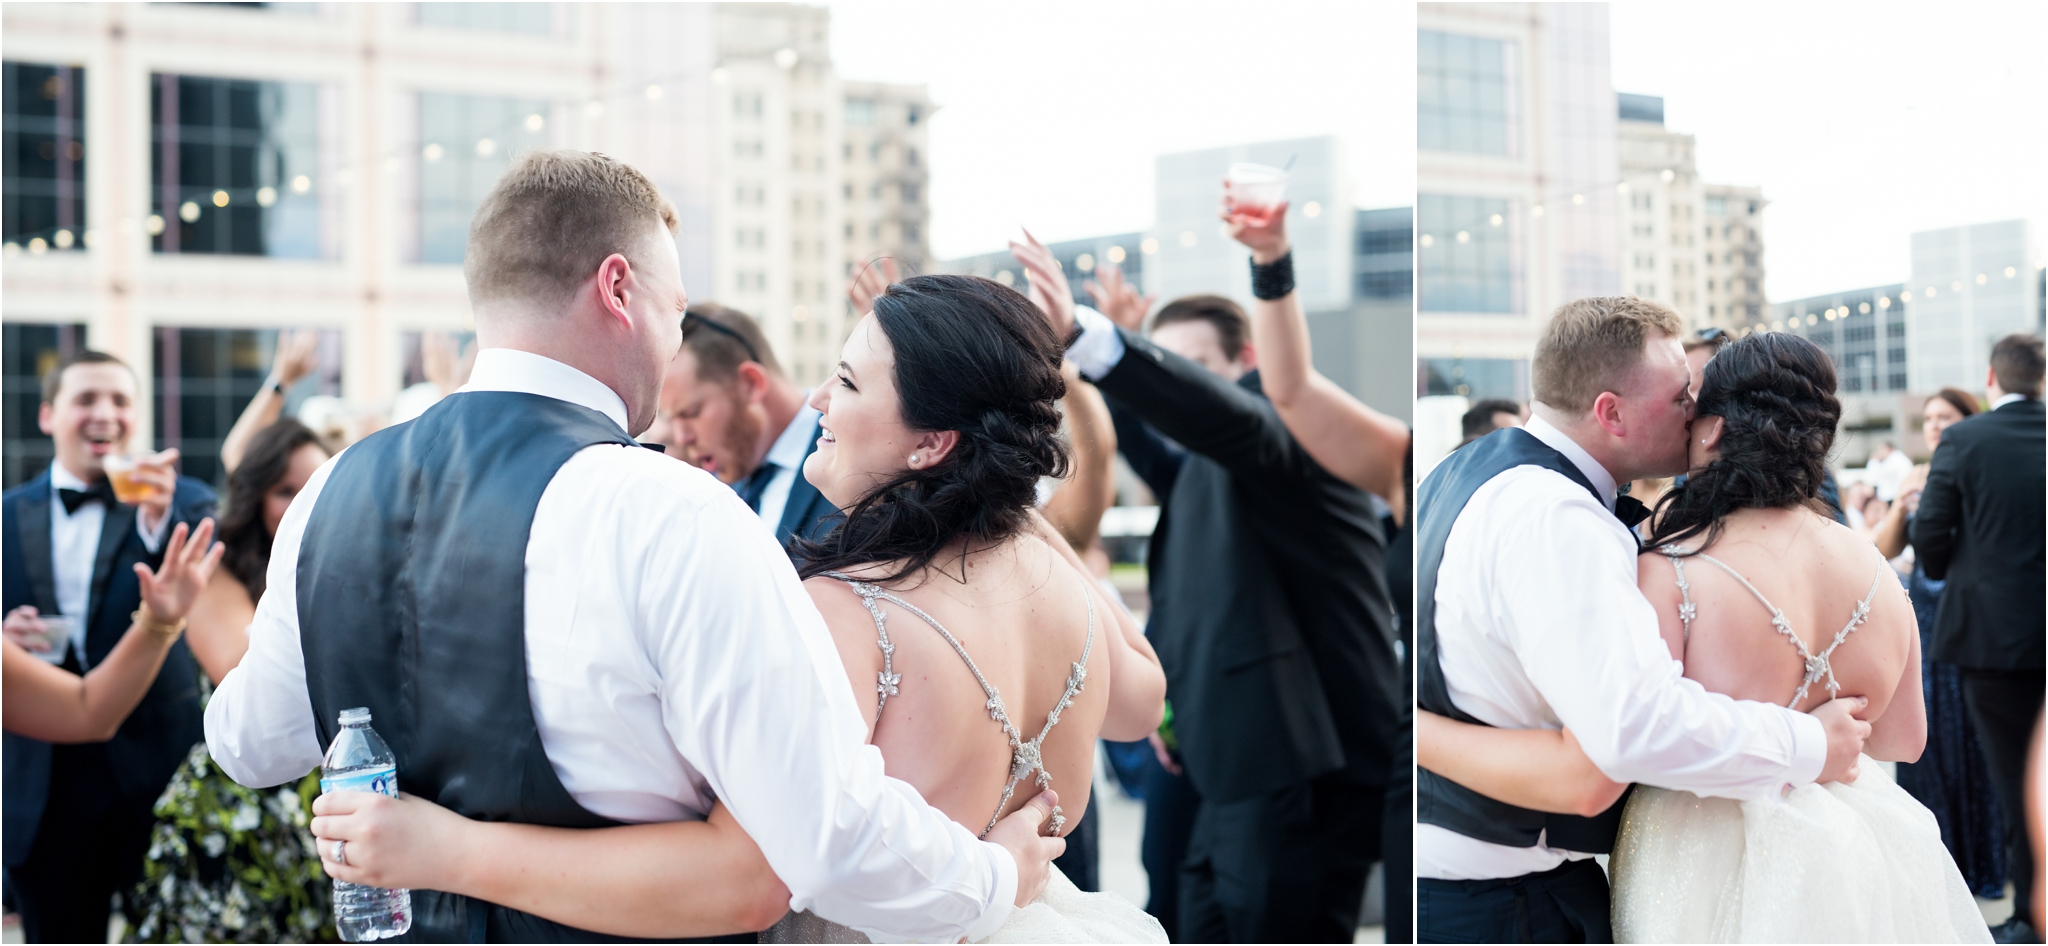 Regions Tower | Sarah and Rachel Wedding Photographers | Indianapolis, IN | Rooftop Reception